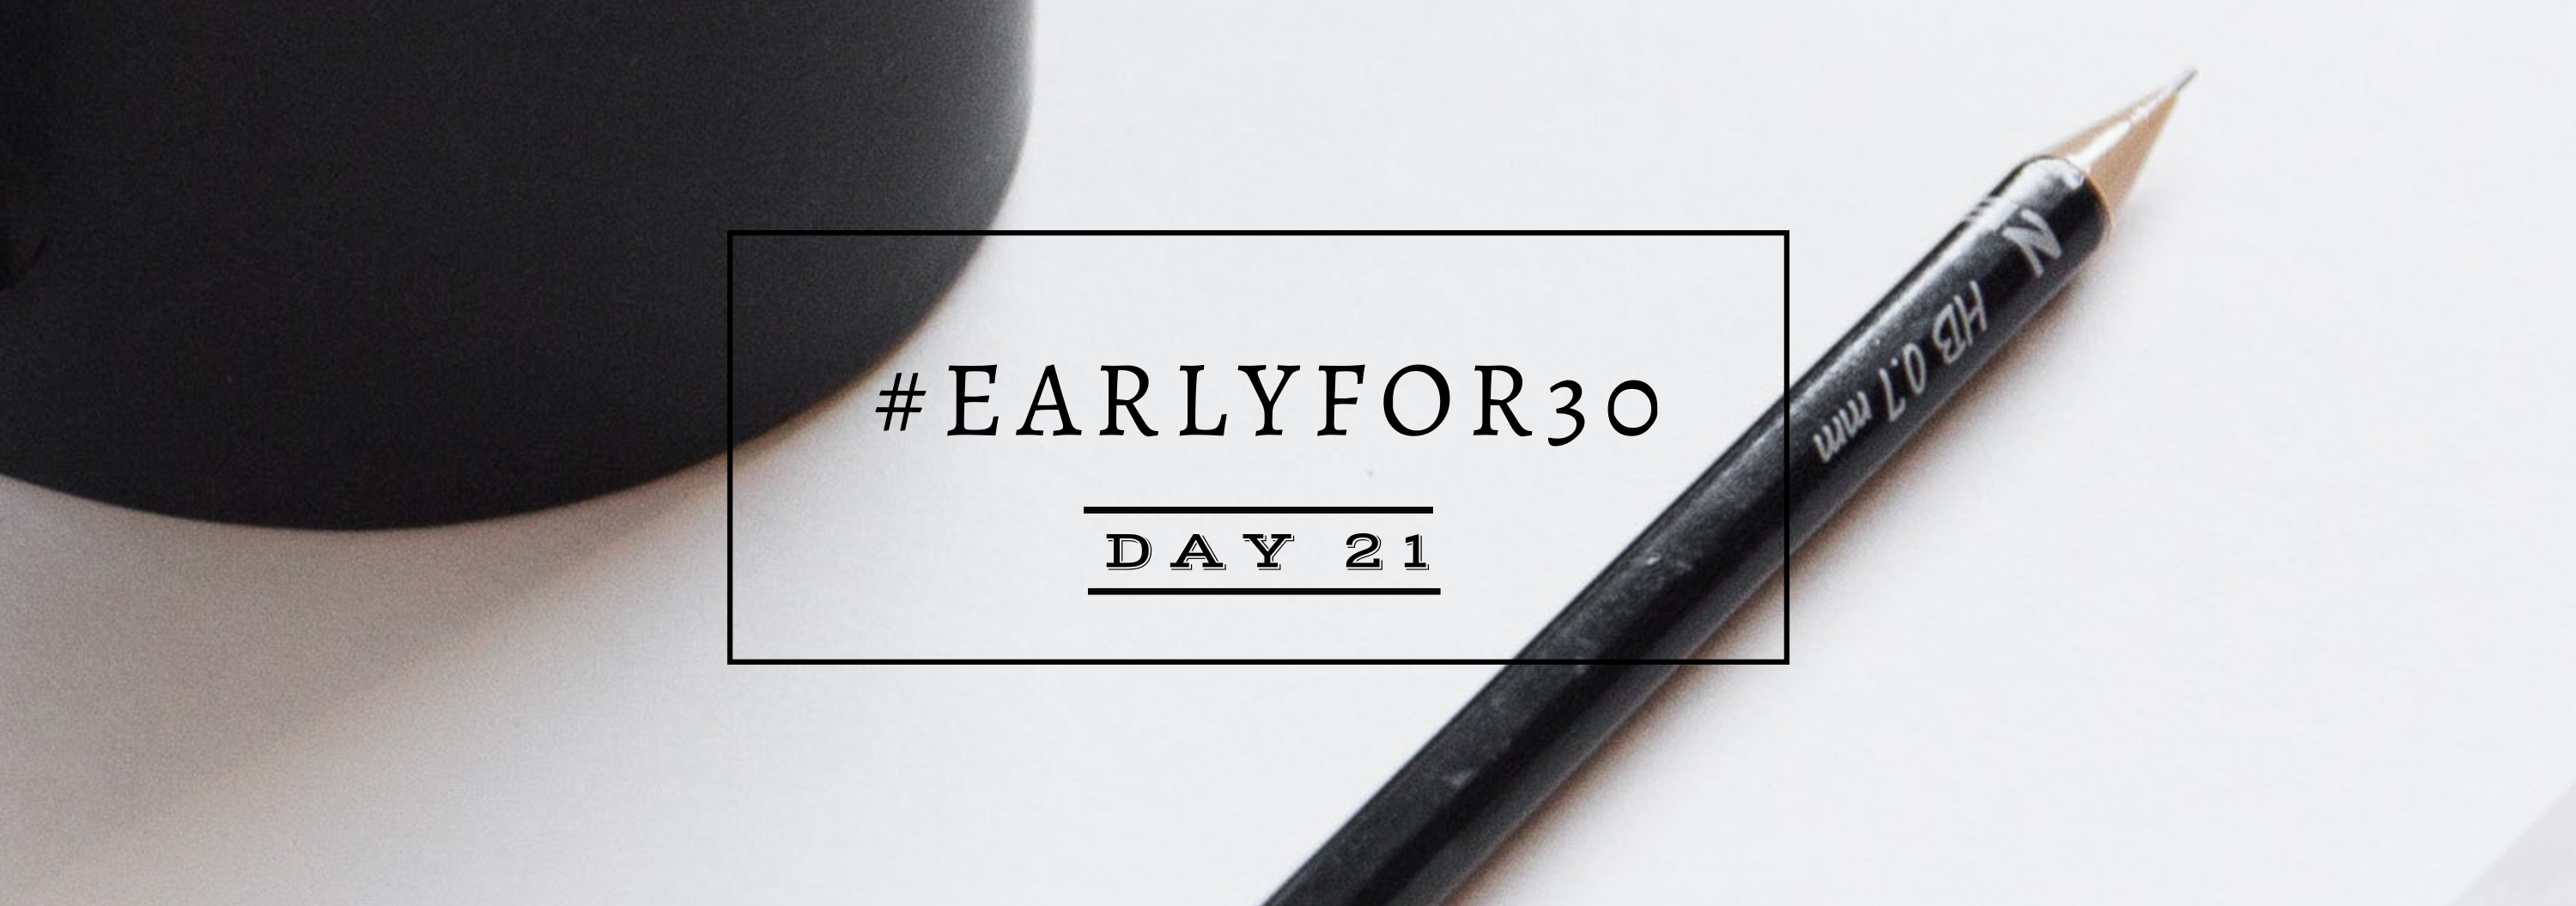 Day 21 Early for 30 Days Challenge